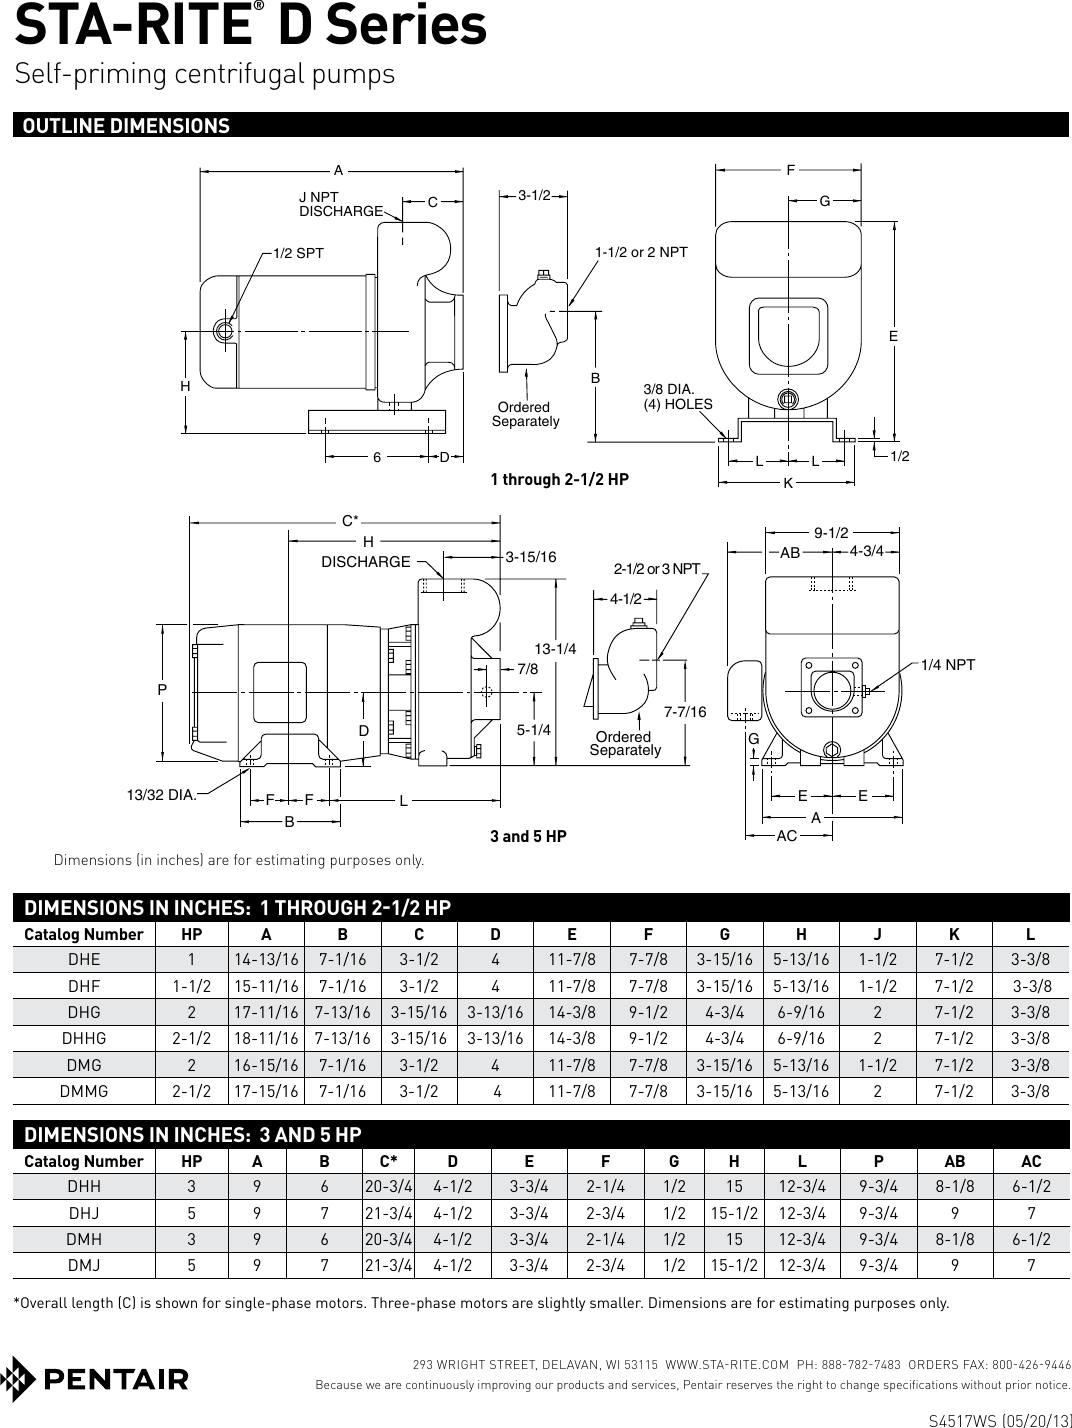 Page 4 of 4 - 539631 1 Sta-Rite D Series Centrifugal Pump Brochure